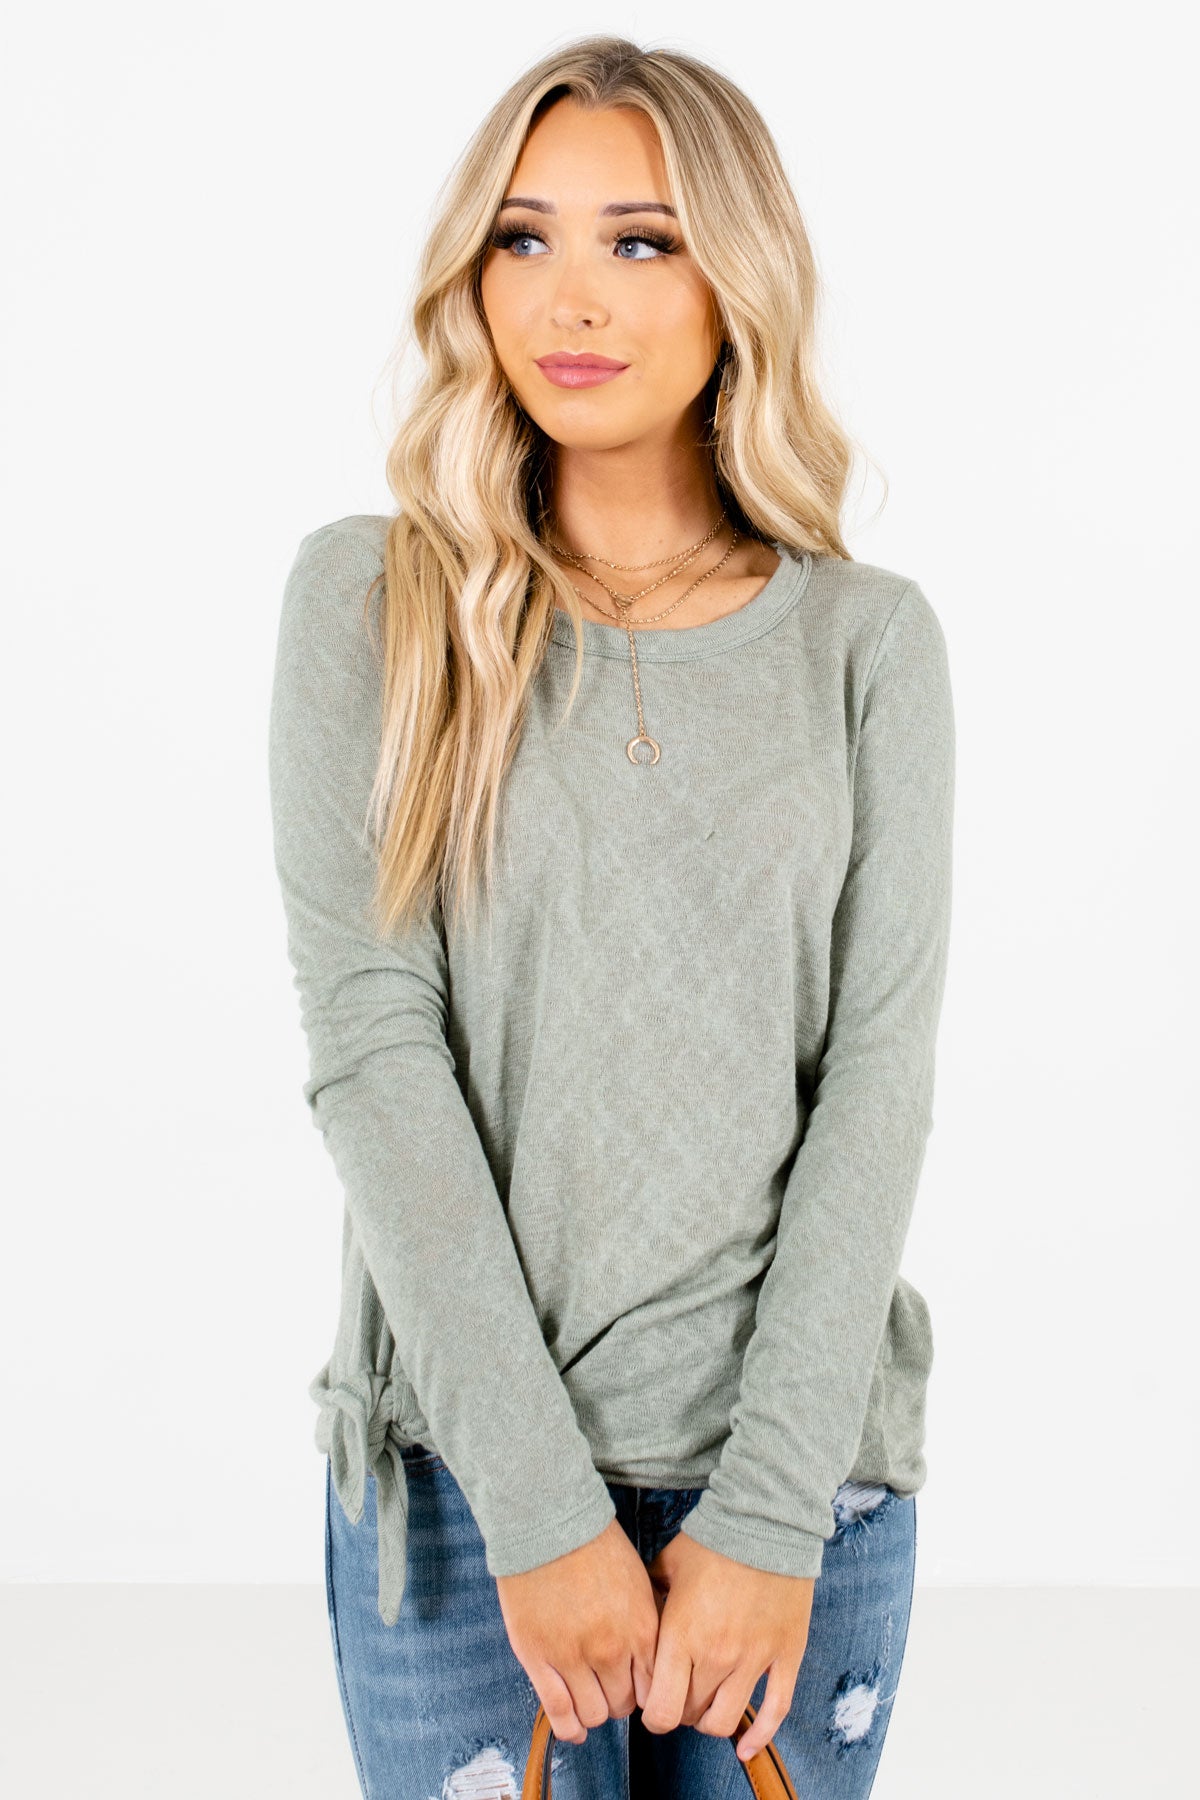 Sage Green Cute and Comfortable Boutique Tops for Women